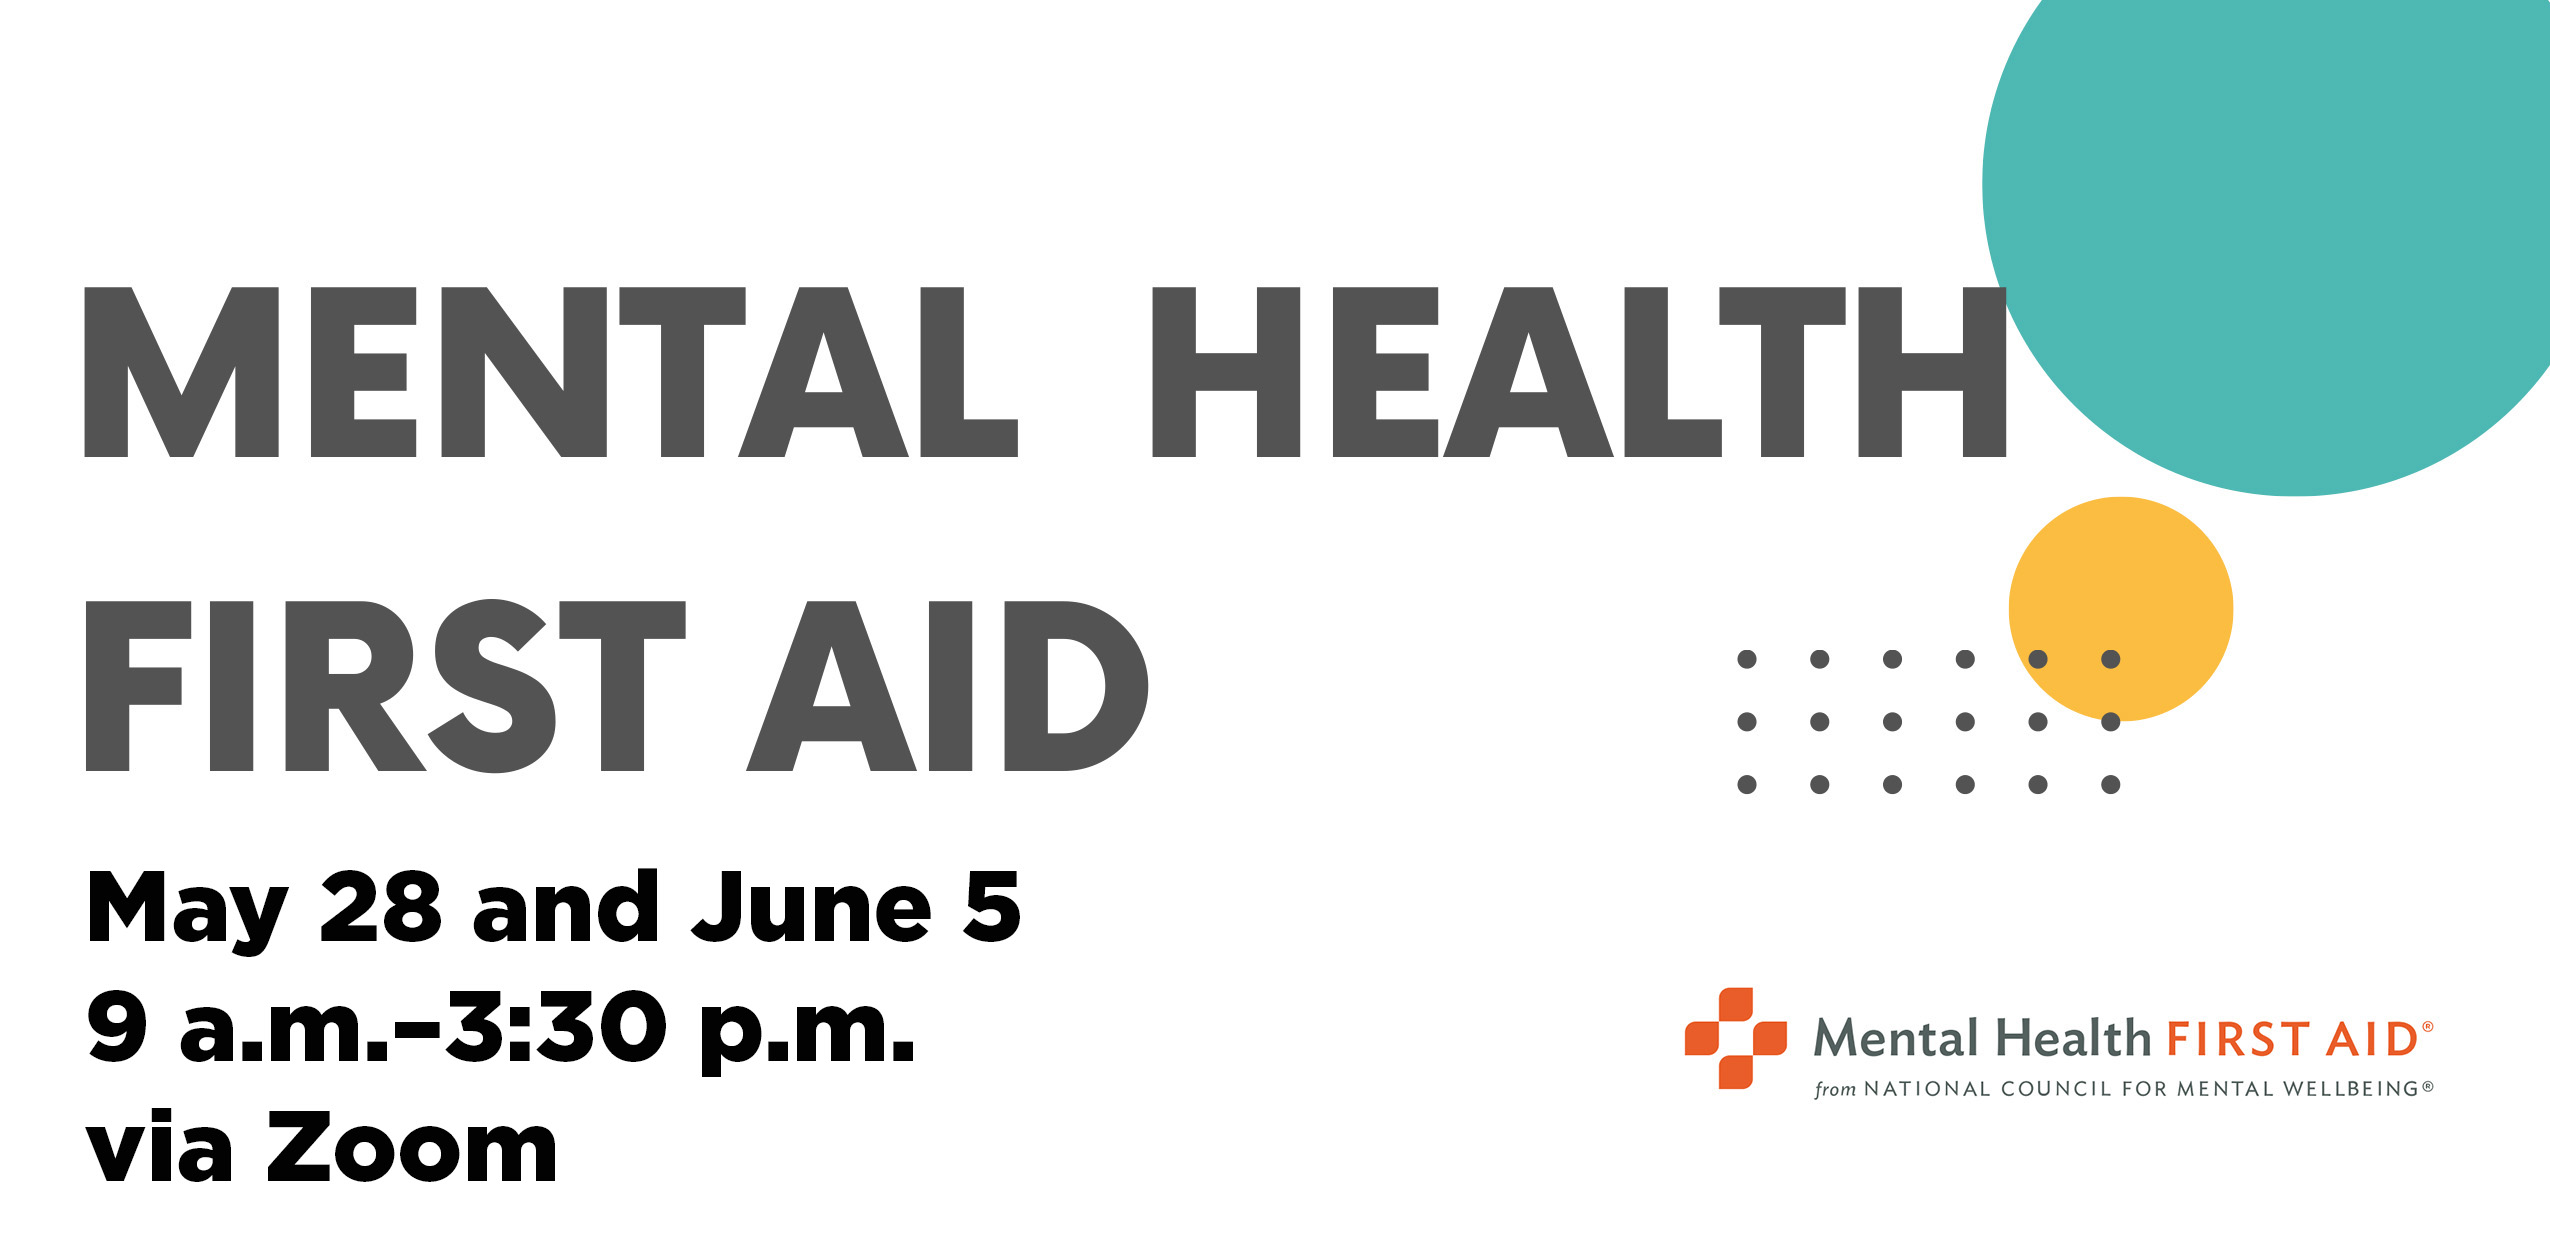 Mental Health First Aid May 28 and June 5, 9 a.m.–3:30 p.m., via Zoom